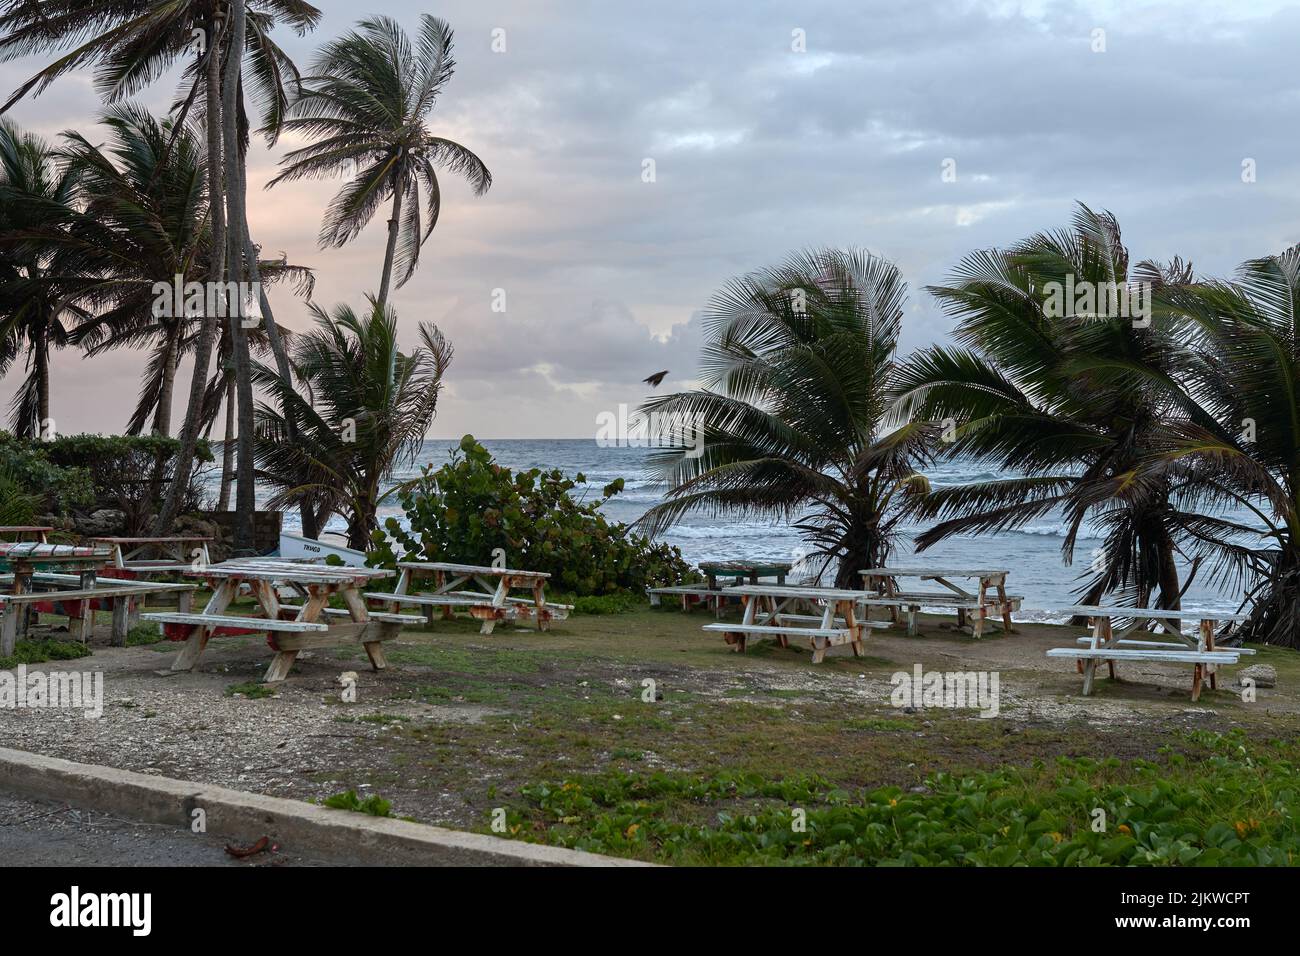 The empty benches and swaying coconut trees on the windy beach Stock Photo